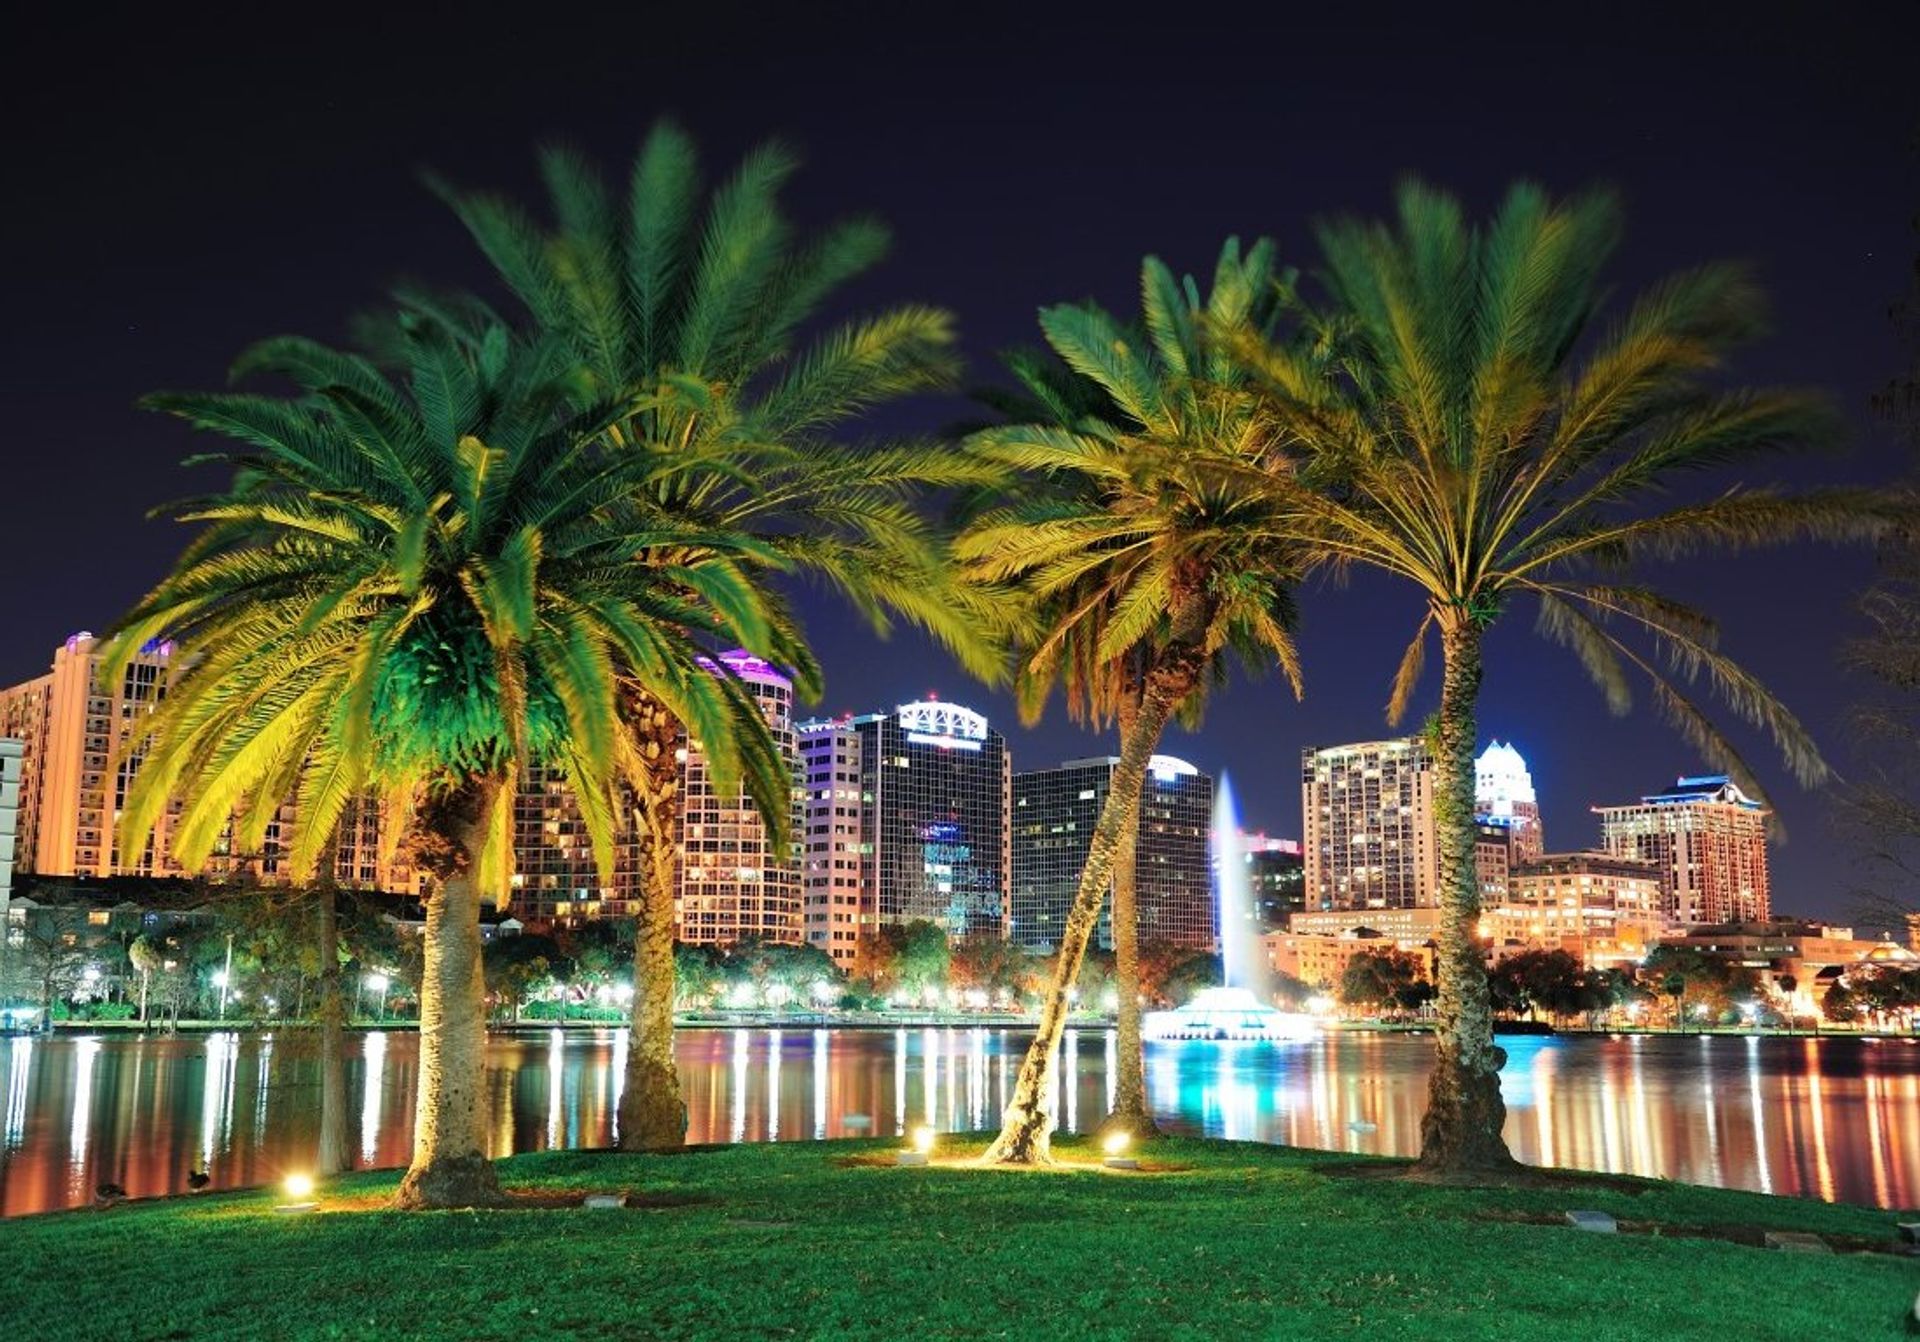 Watch the sun set over Lake Eola over downtown Orlando